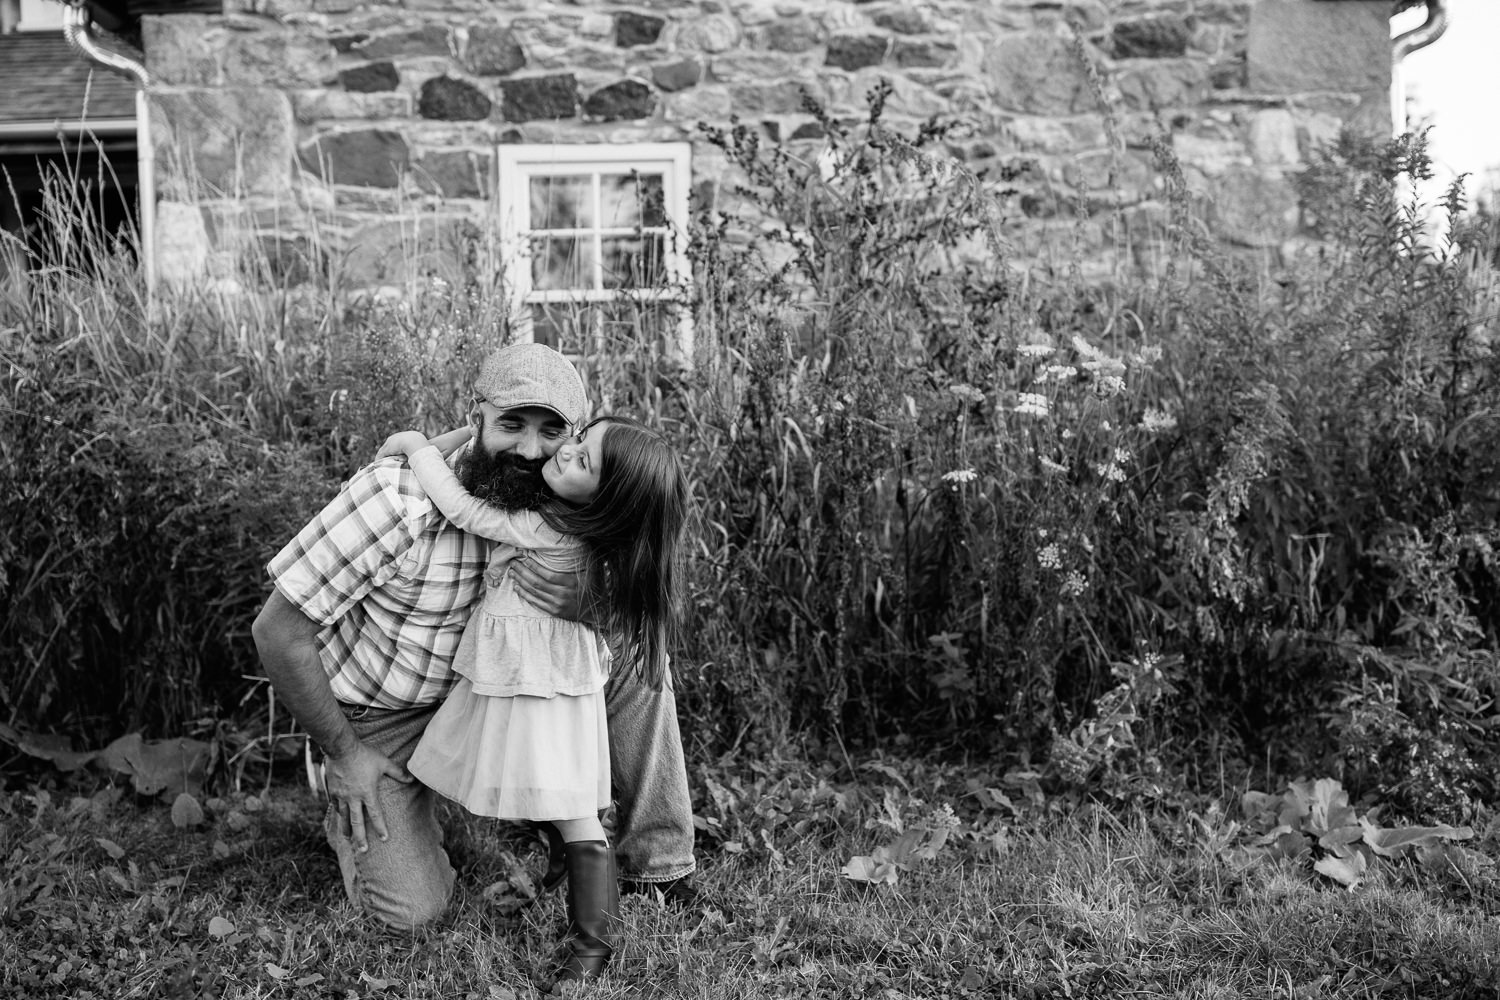 father bending down on one knee in front of old stone house as 5 year old girl hugs him around the neck, dad's arm around daughter - Stouffville Lifestyle Photos